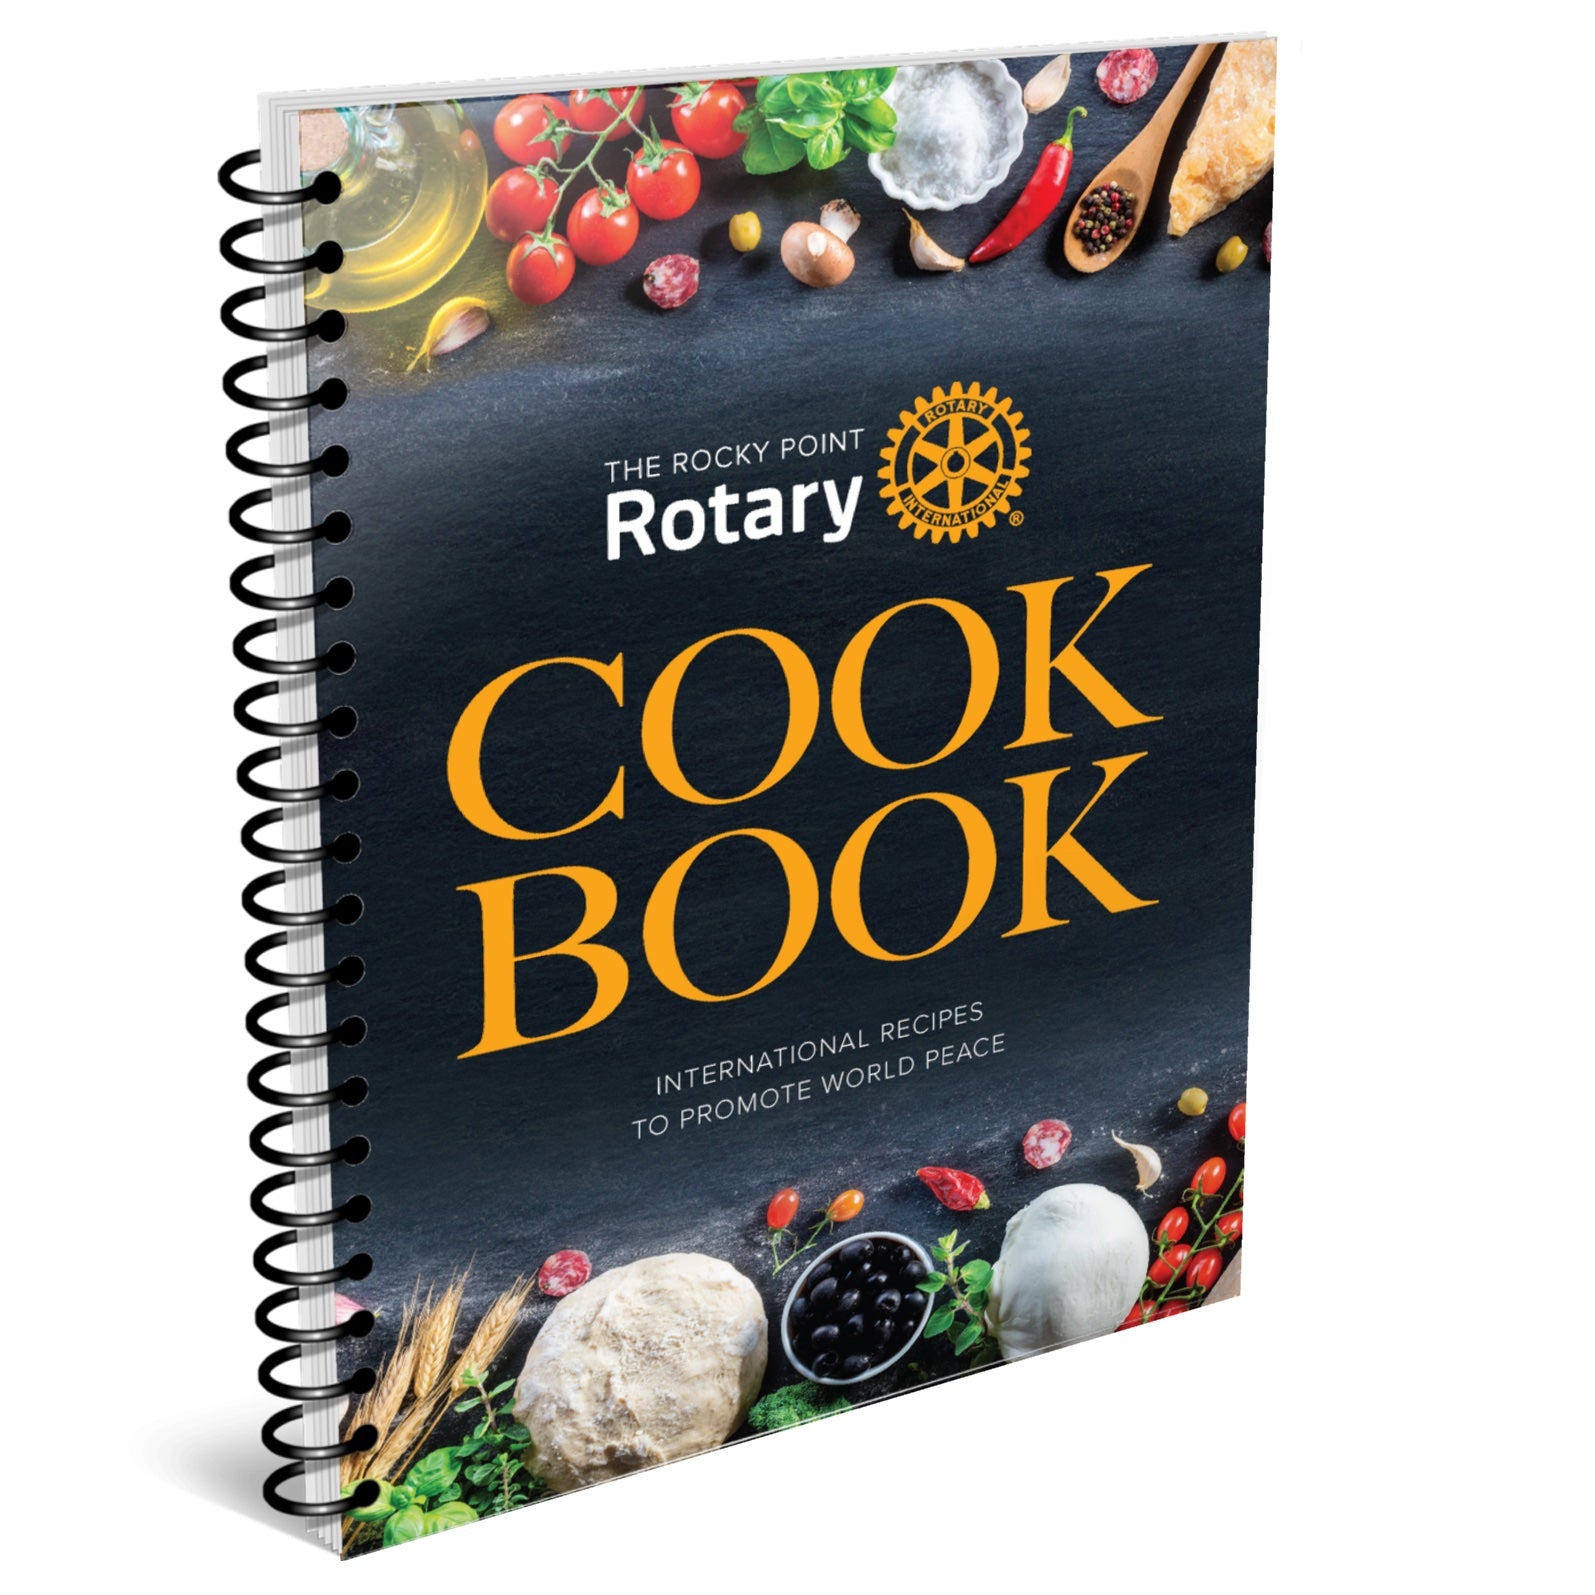 The Rocky Point Rotary Cookbook: International Recipes to Promote World Peace. Spiral Bound